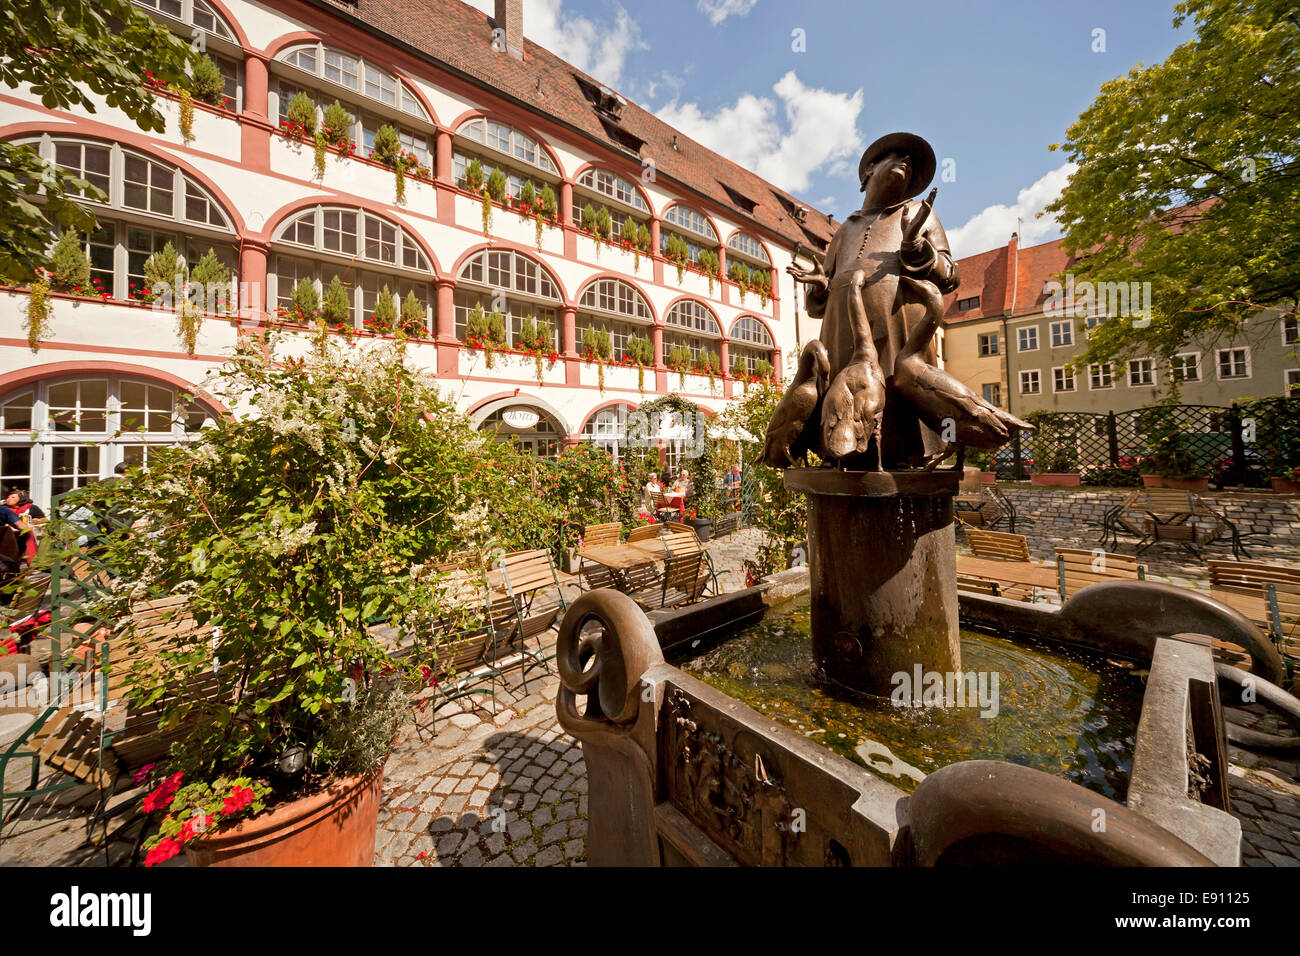 fountain and hotel of the Bischofshof courtyard in Regensburg, Bavaria, Germany, Europe Stock Photo